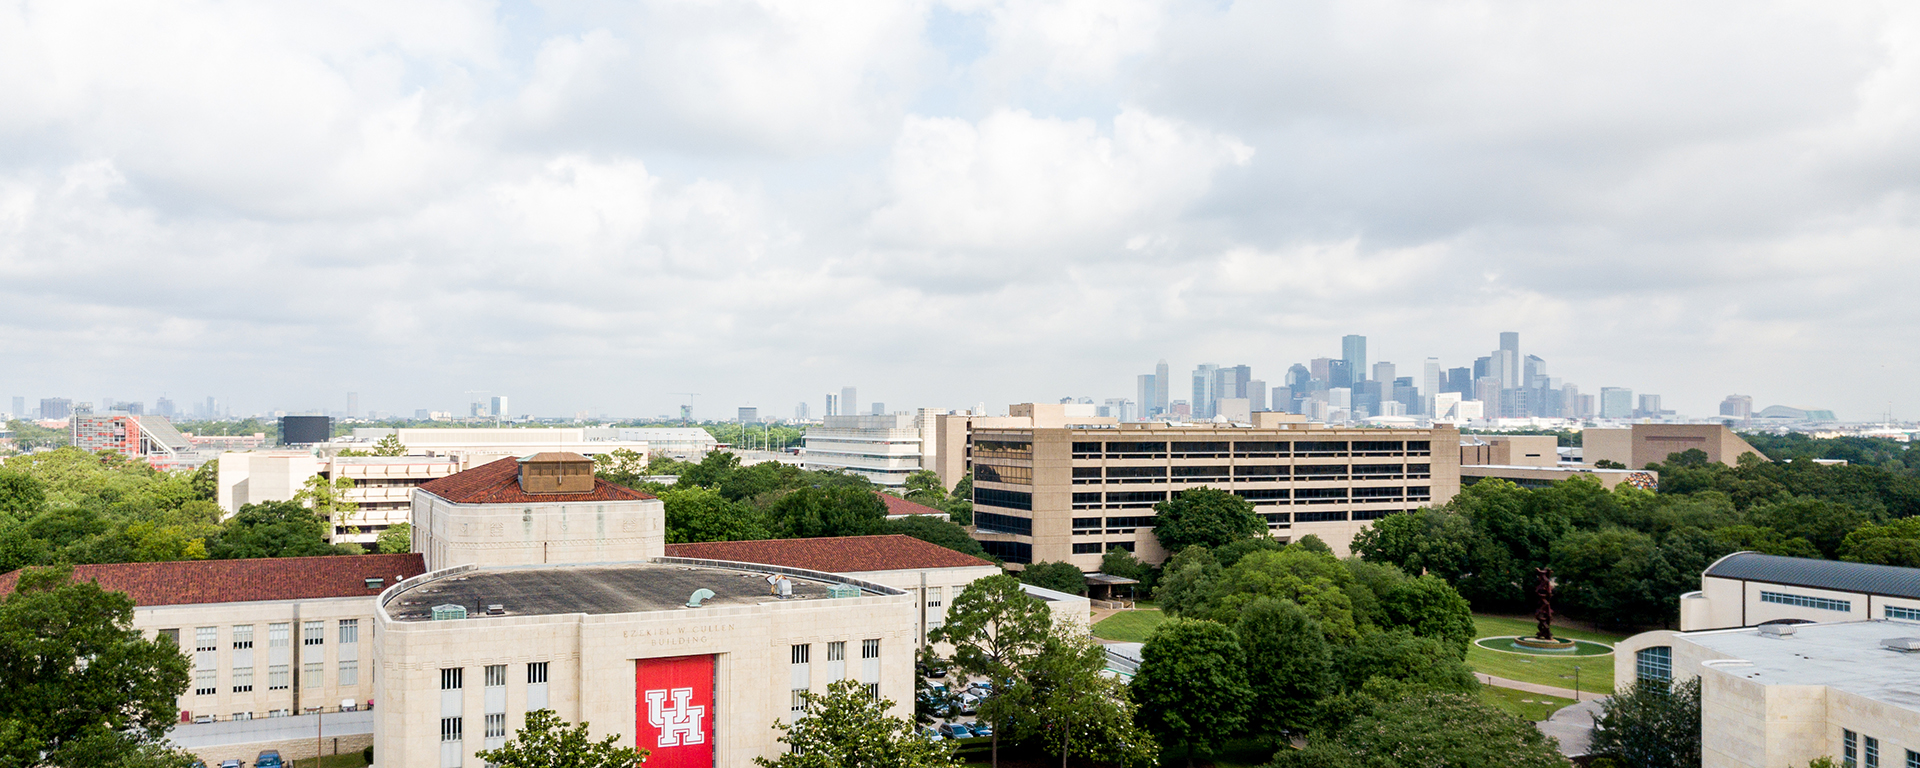 University of Houston Campus aerial view with downtown Houston skyline